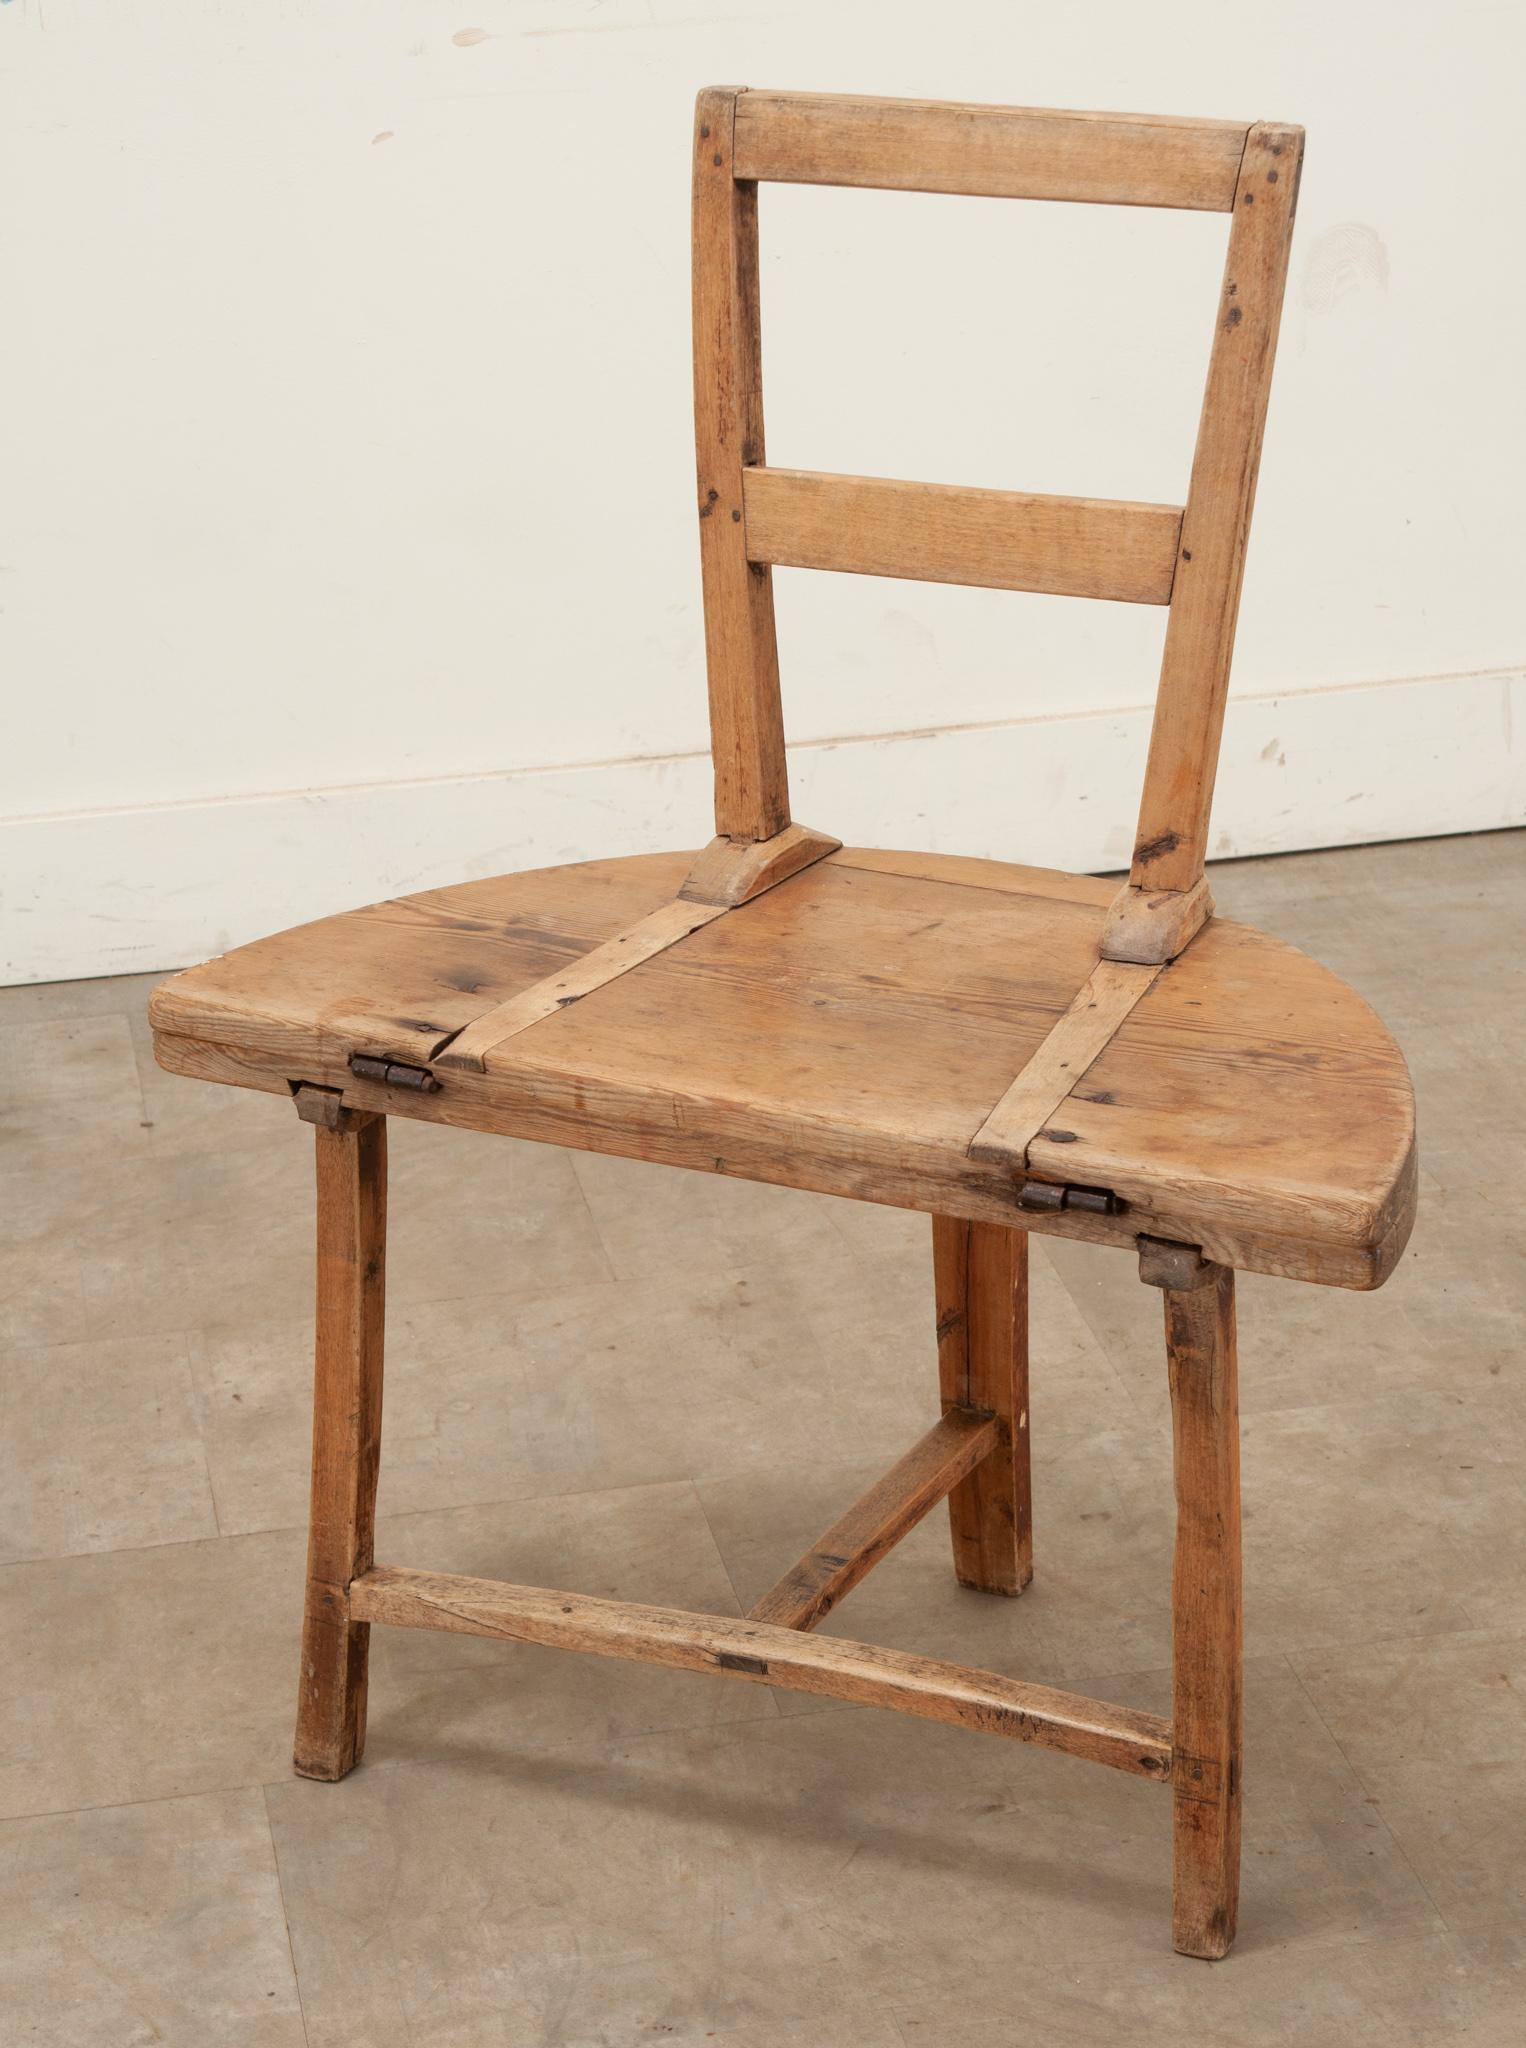 A pine Swedish chair-table from the 1700’s. This functional antique is a chair that converts into a table by use of hand forged iron hinges that allow the chair’s back to fold down and form the table’s top and legs. Cleaned and polished with a paste